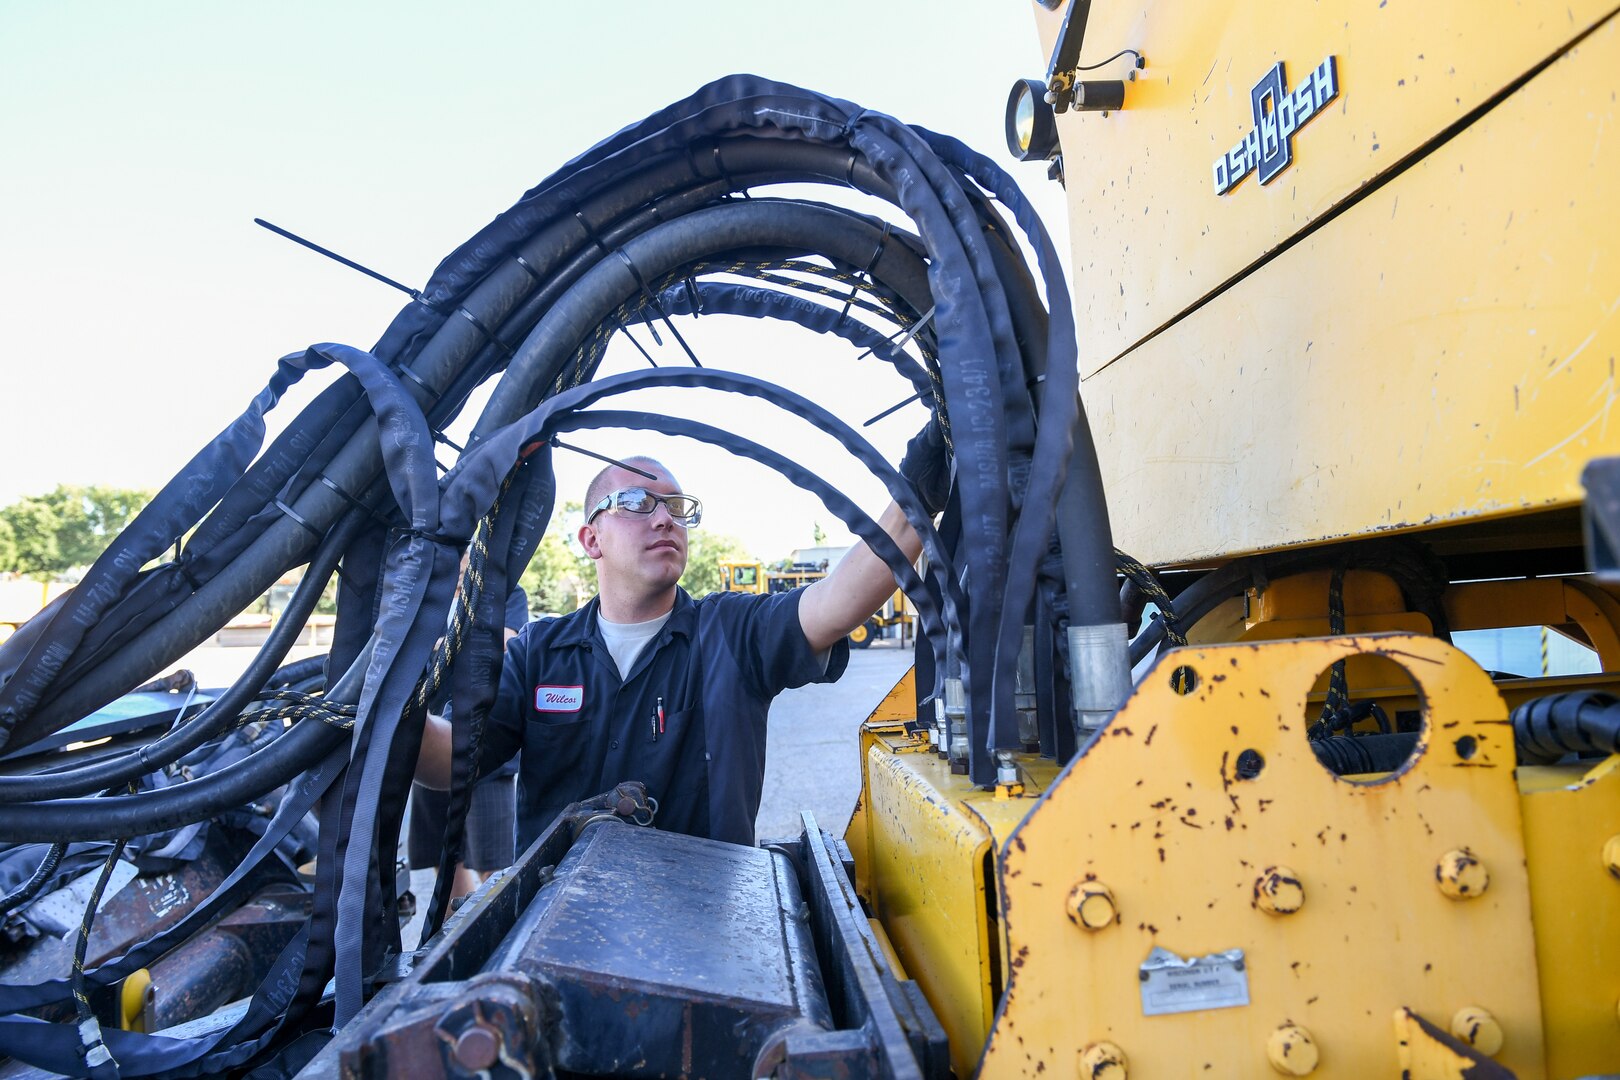 Senior Airman Jacob Wilcox, 75th Logistics Readiness Squadron, performs maintenance on the hydraulics of an OshKosh snow broom at Hill Air Force Base, Utah, Aug. 1, 2019. The squadron is overhauling the base's snow fleet after a snowy winter to be ready for the next winter season. (U.S. Air Force photo by Cynthia Griggs)